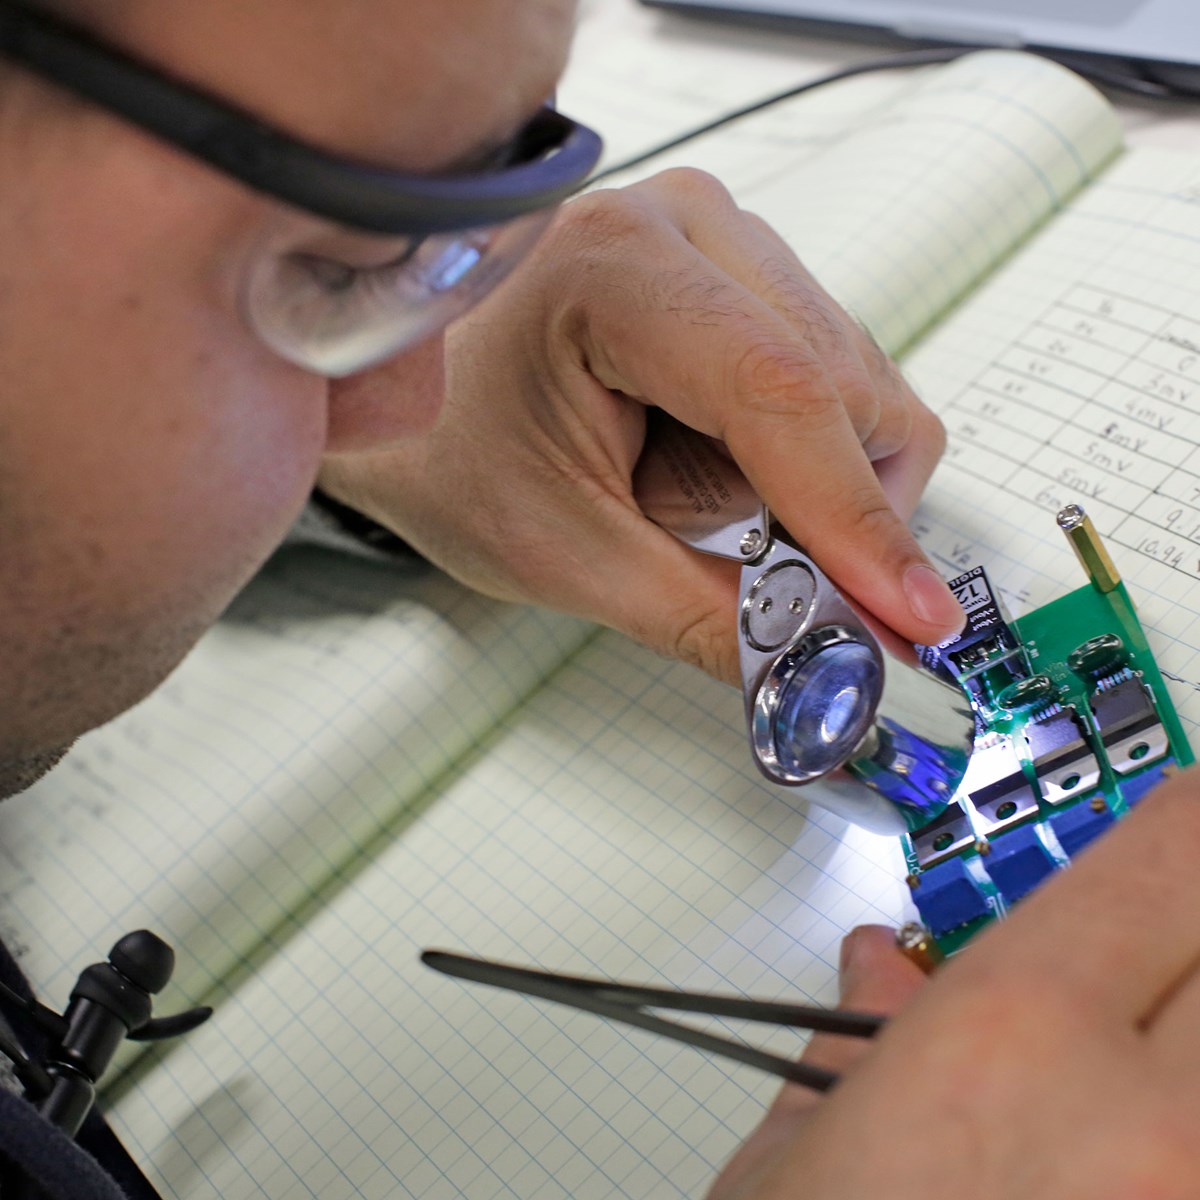 Computer engineering student holding circuit or computer component